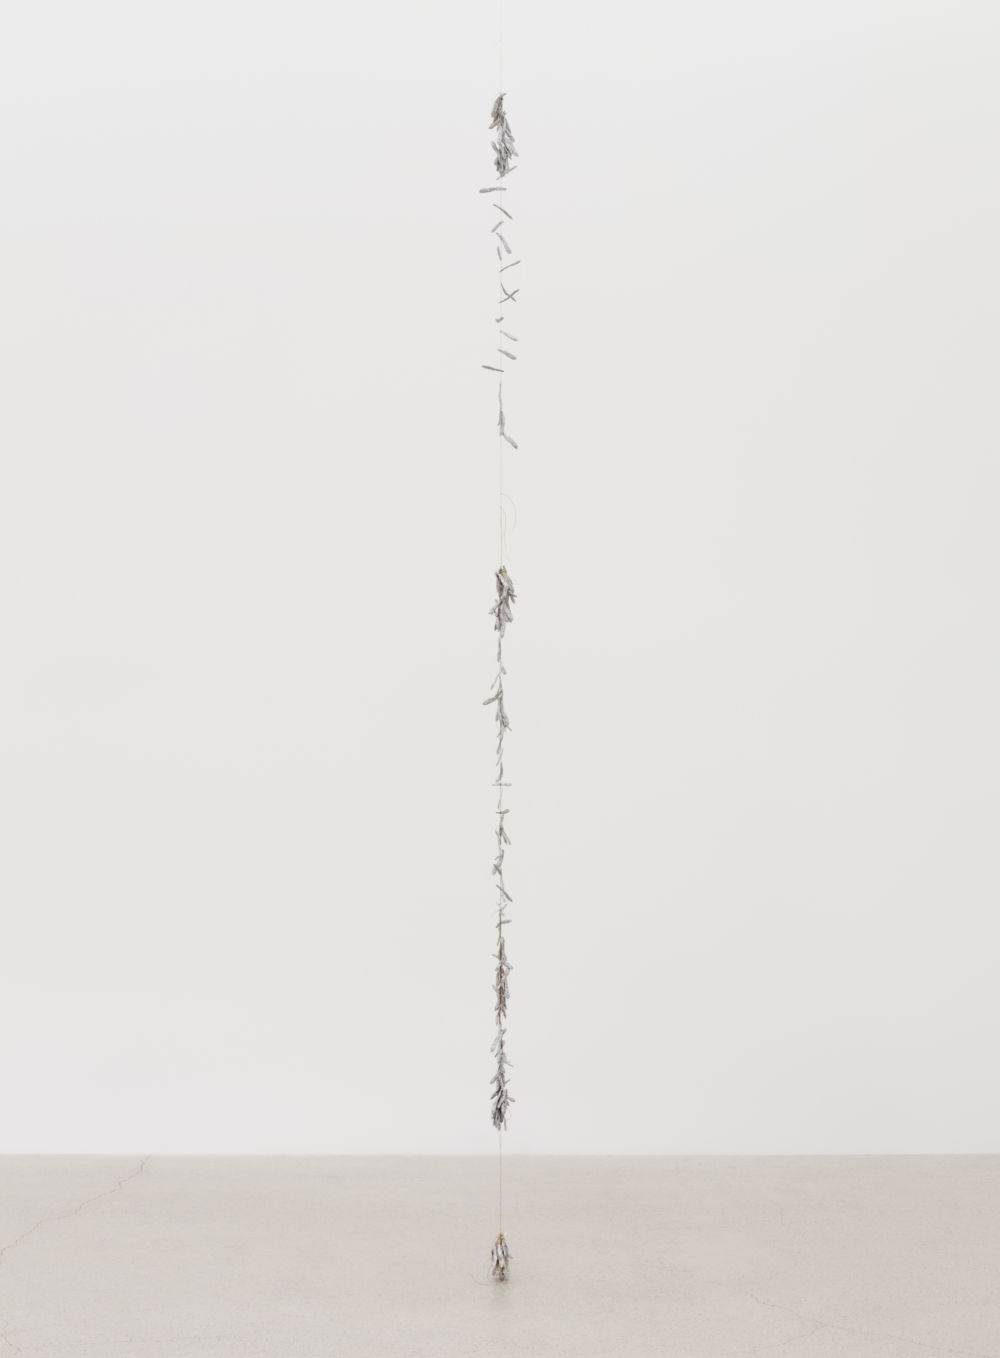 Laurie Kang, Plexus, 2022, cast aluminum anchovies, thread, 102 1/4 x 4 x 4 in. (260 x 10 x 10 cm) by 